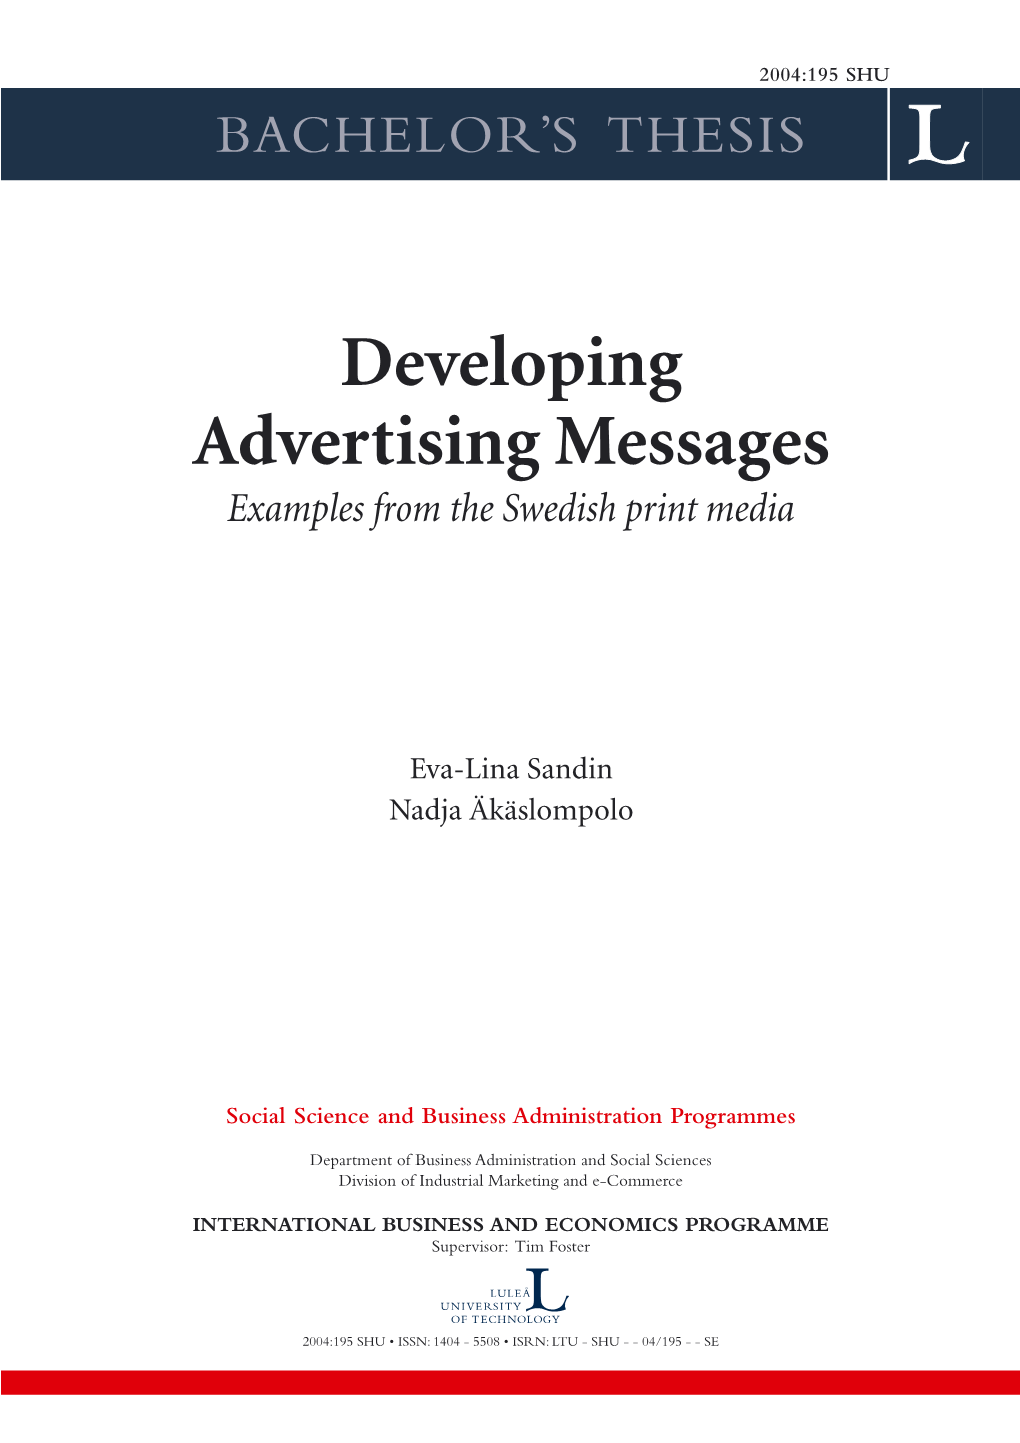 Developing Advertising Messages: Examples from the Swedish Print